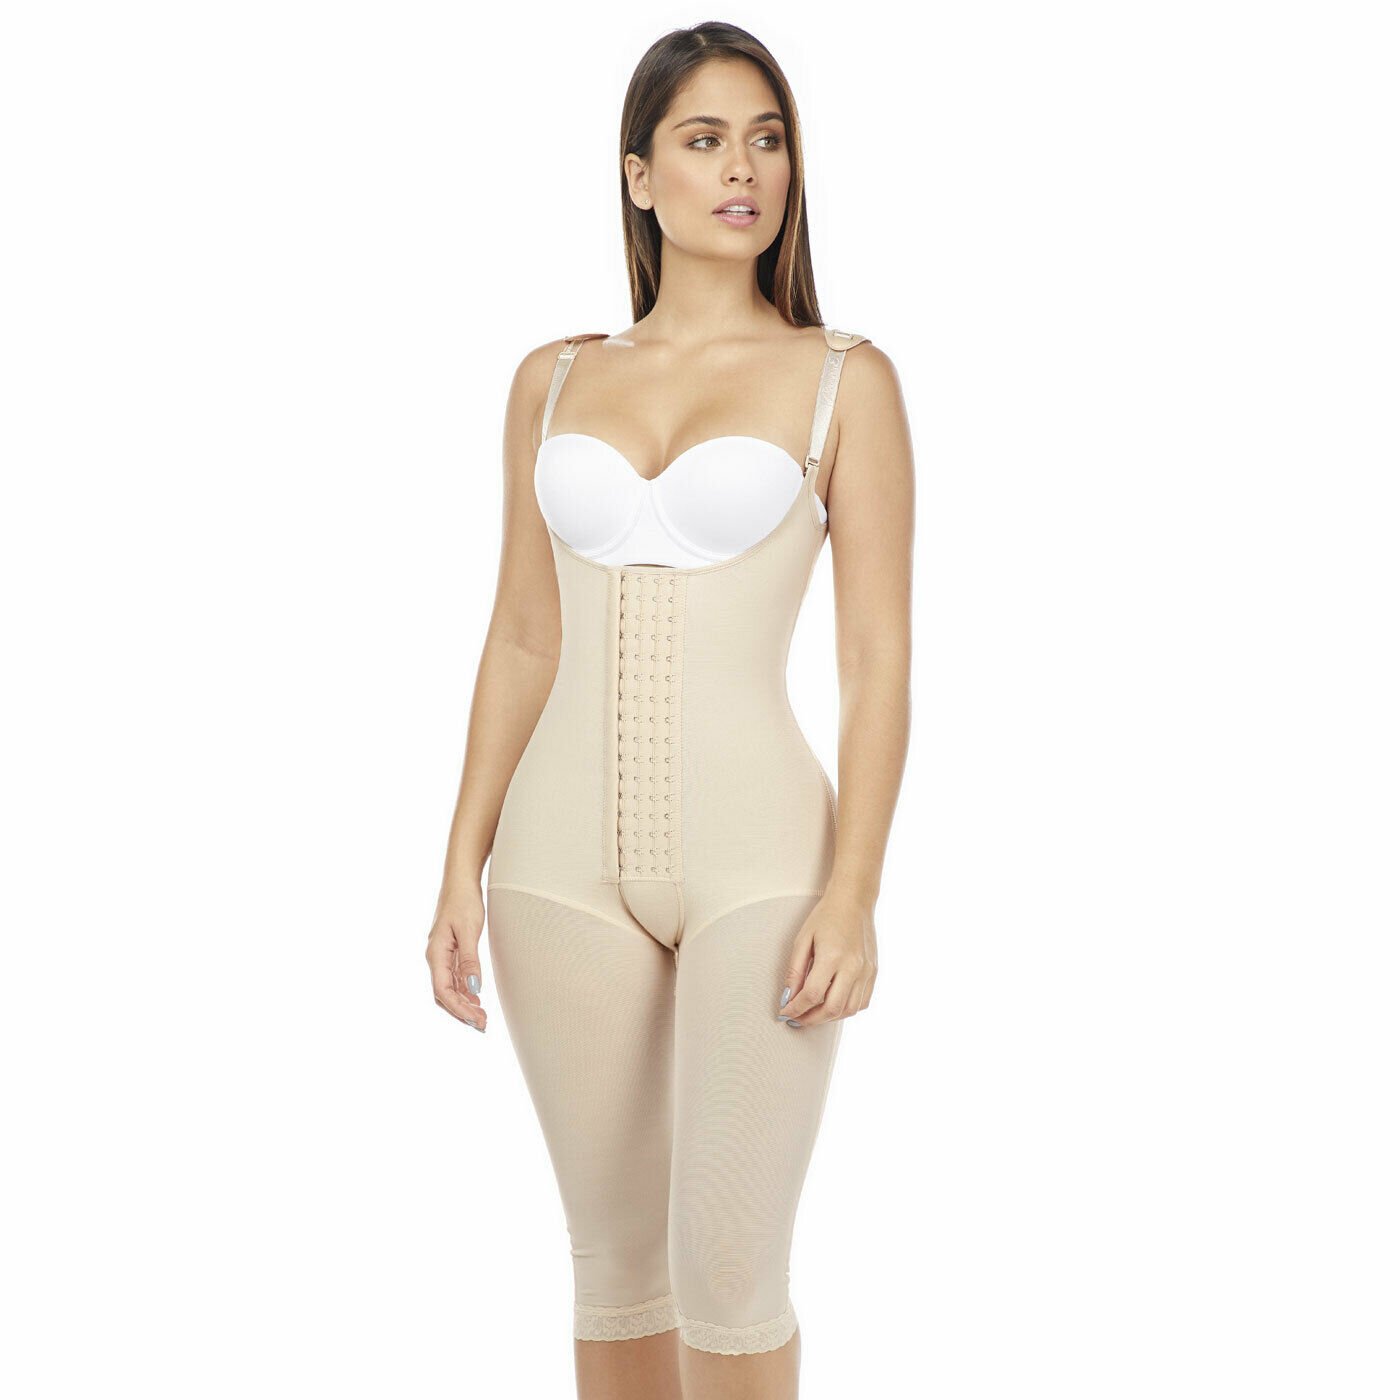 Post Surgery Girdle Full Body Shaper with Sleeves Fajas Colombianas Salome 0525 